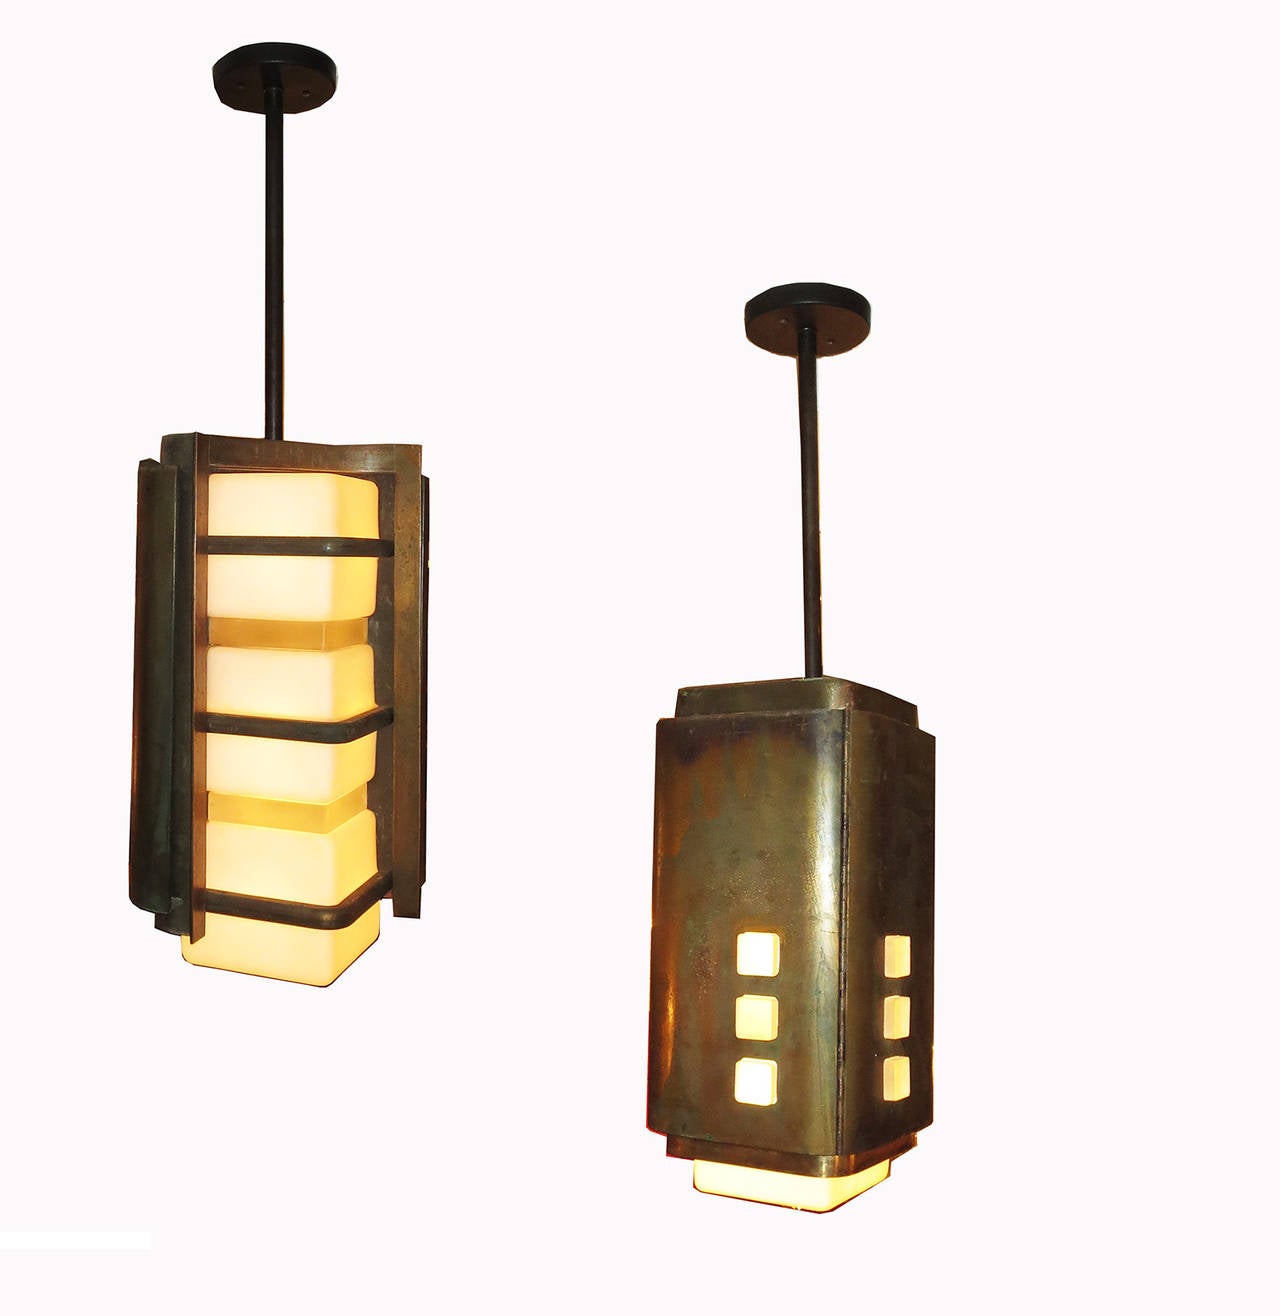 This fantastic pair of originally graced a Mid-Century Modern architectural building here in Southern California. Created by an unknown architect or designer, the lamps display all the hallmarks of post Frank Lloyd Wright modernism. The cabinets are